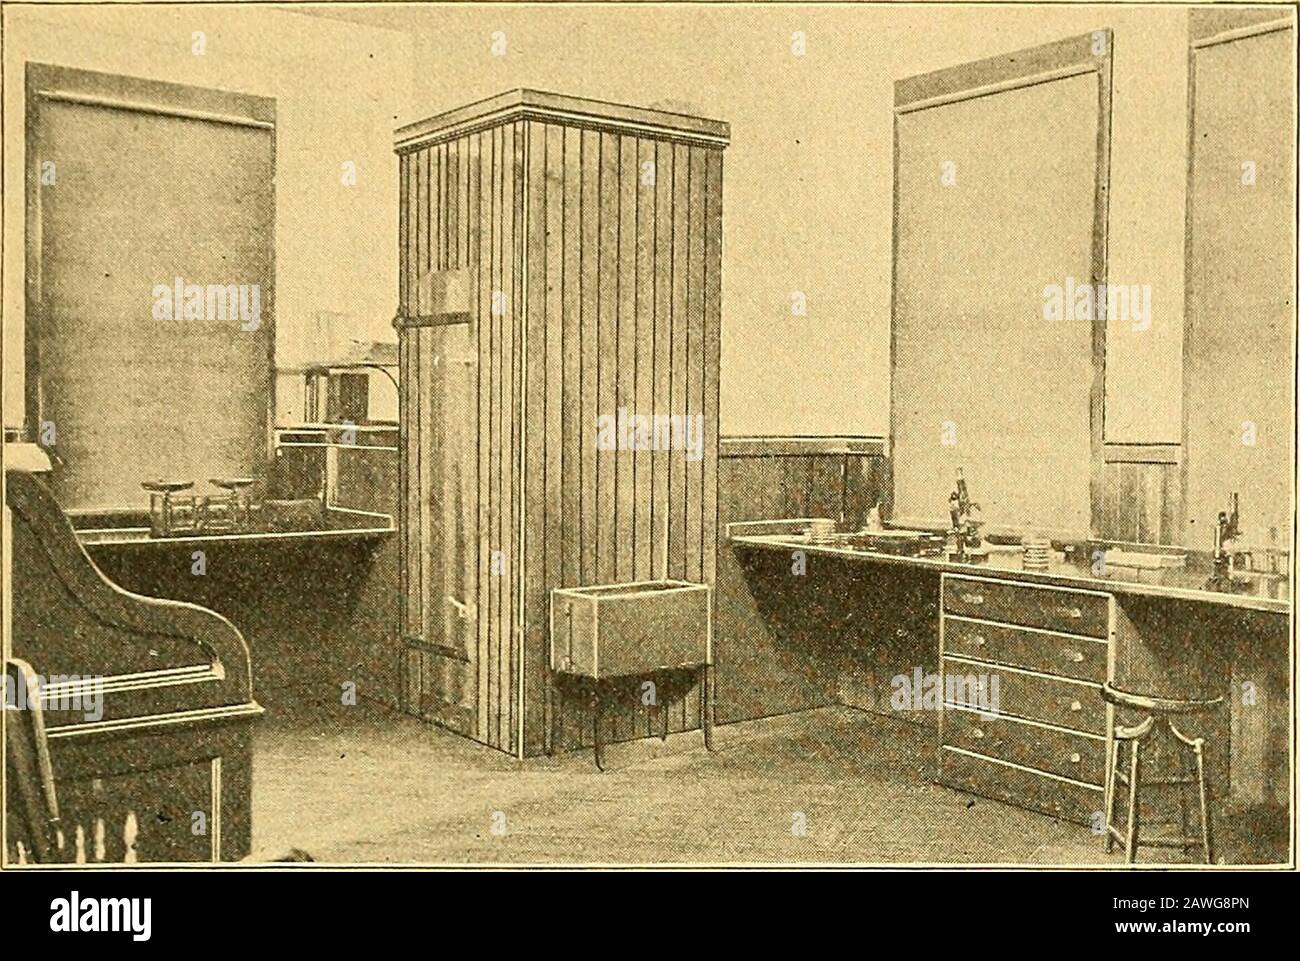 Annual report of the Storrs Agricultural Experiment Station, Storrs, Conn . Fig. 2.Room No. 2. Dust-proof Room of Dairy Bacteriology Laboratory. This dust-proof room is six by eight feet in size, entirely ofglass set in putty so that dust cannot enter. The room is wellsupplied with shelves for the storage of sterilized glassware.In this room cultures may be made with very little danger ofexternal contamination.. Fig. 3. Cold Storage Chamber of Dairy Bacteriology Laboratory. Stock Photo